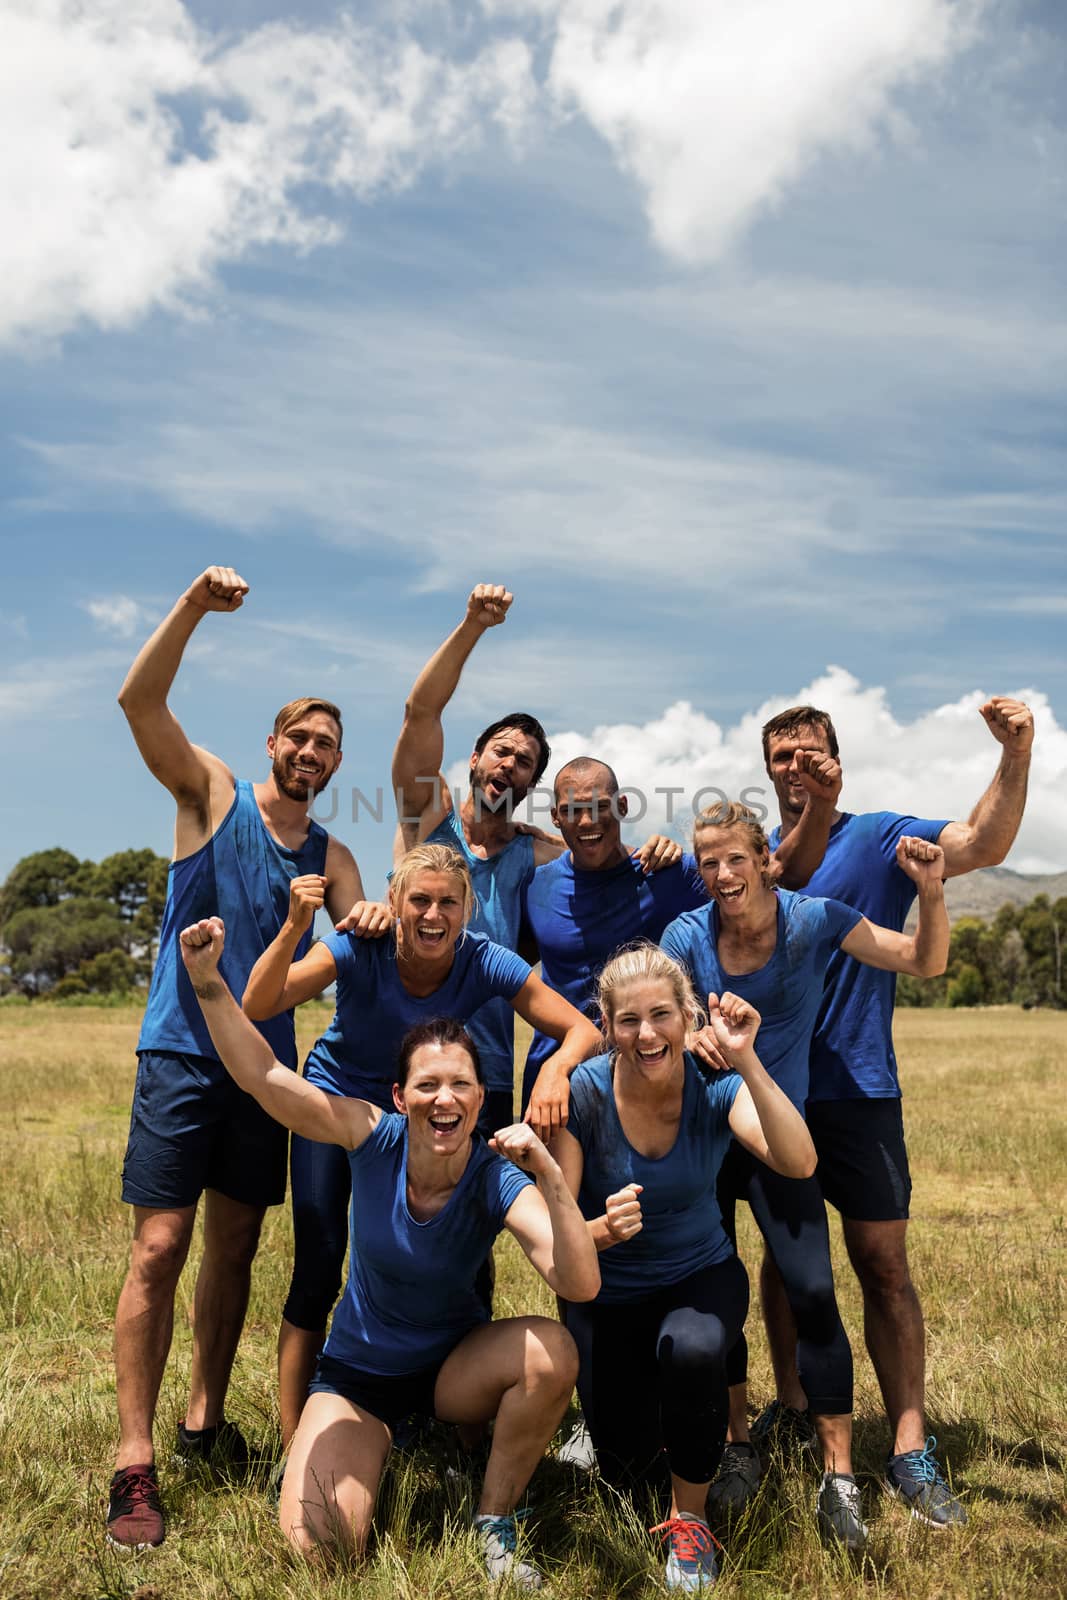 Group of fit people posing together in boot camp on a sunny day